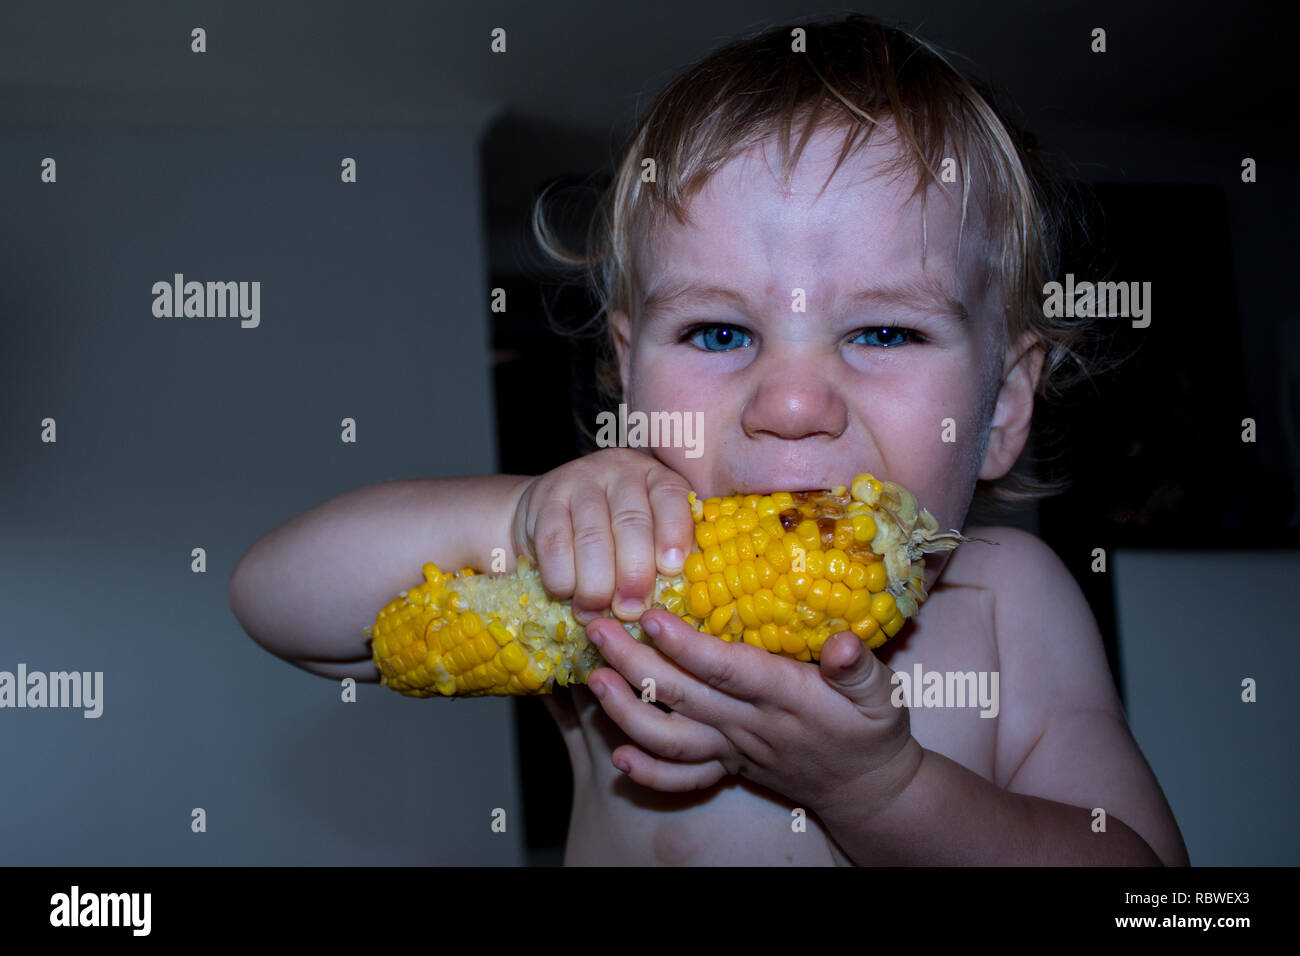 A photo of a little boy eating and enjoying maize (corn) Stock Photo